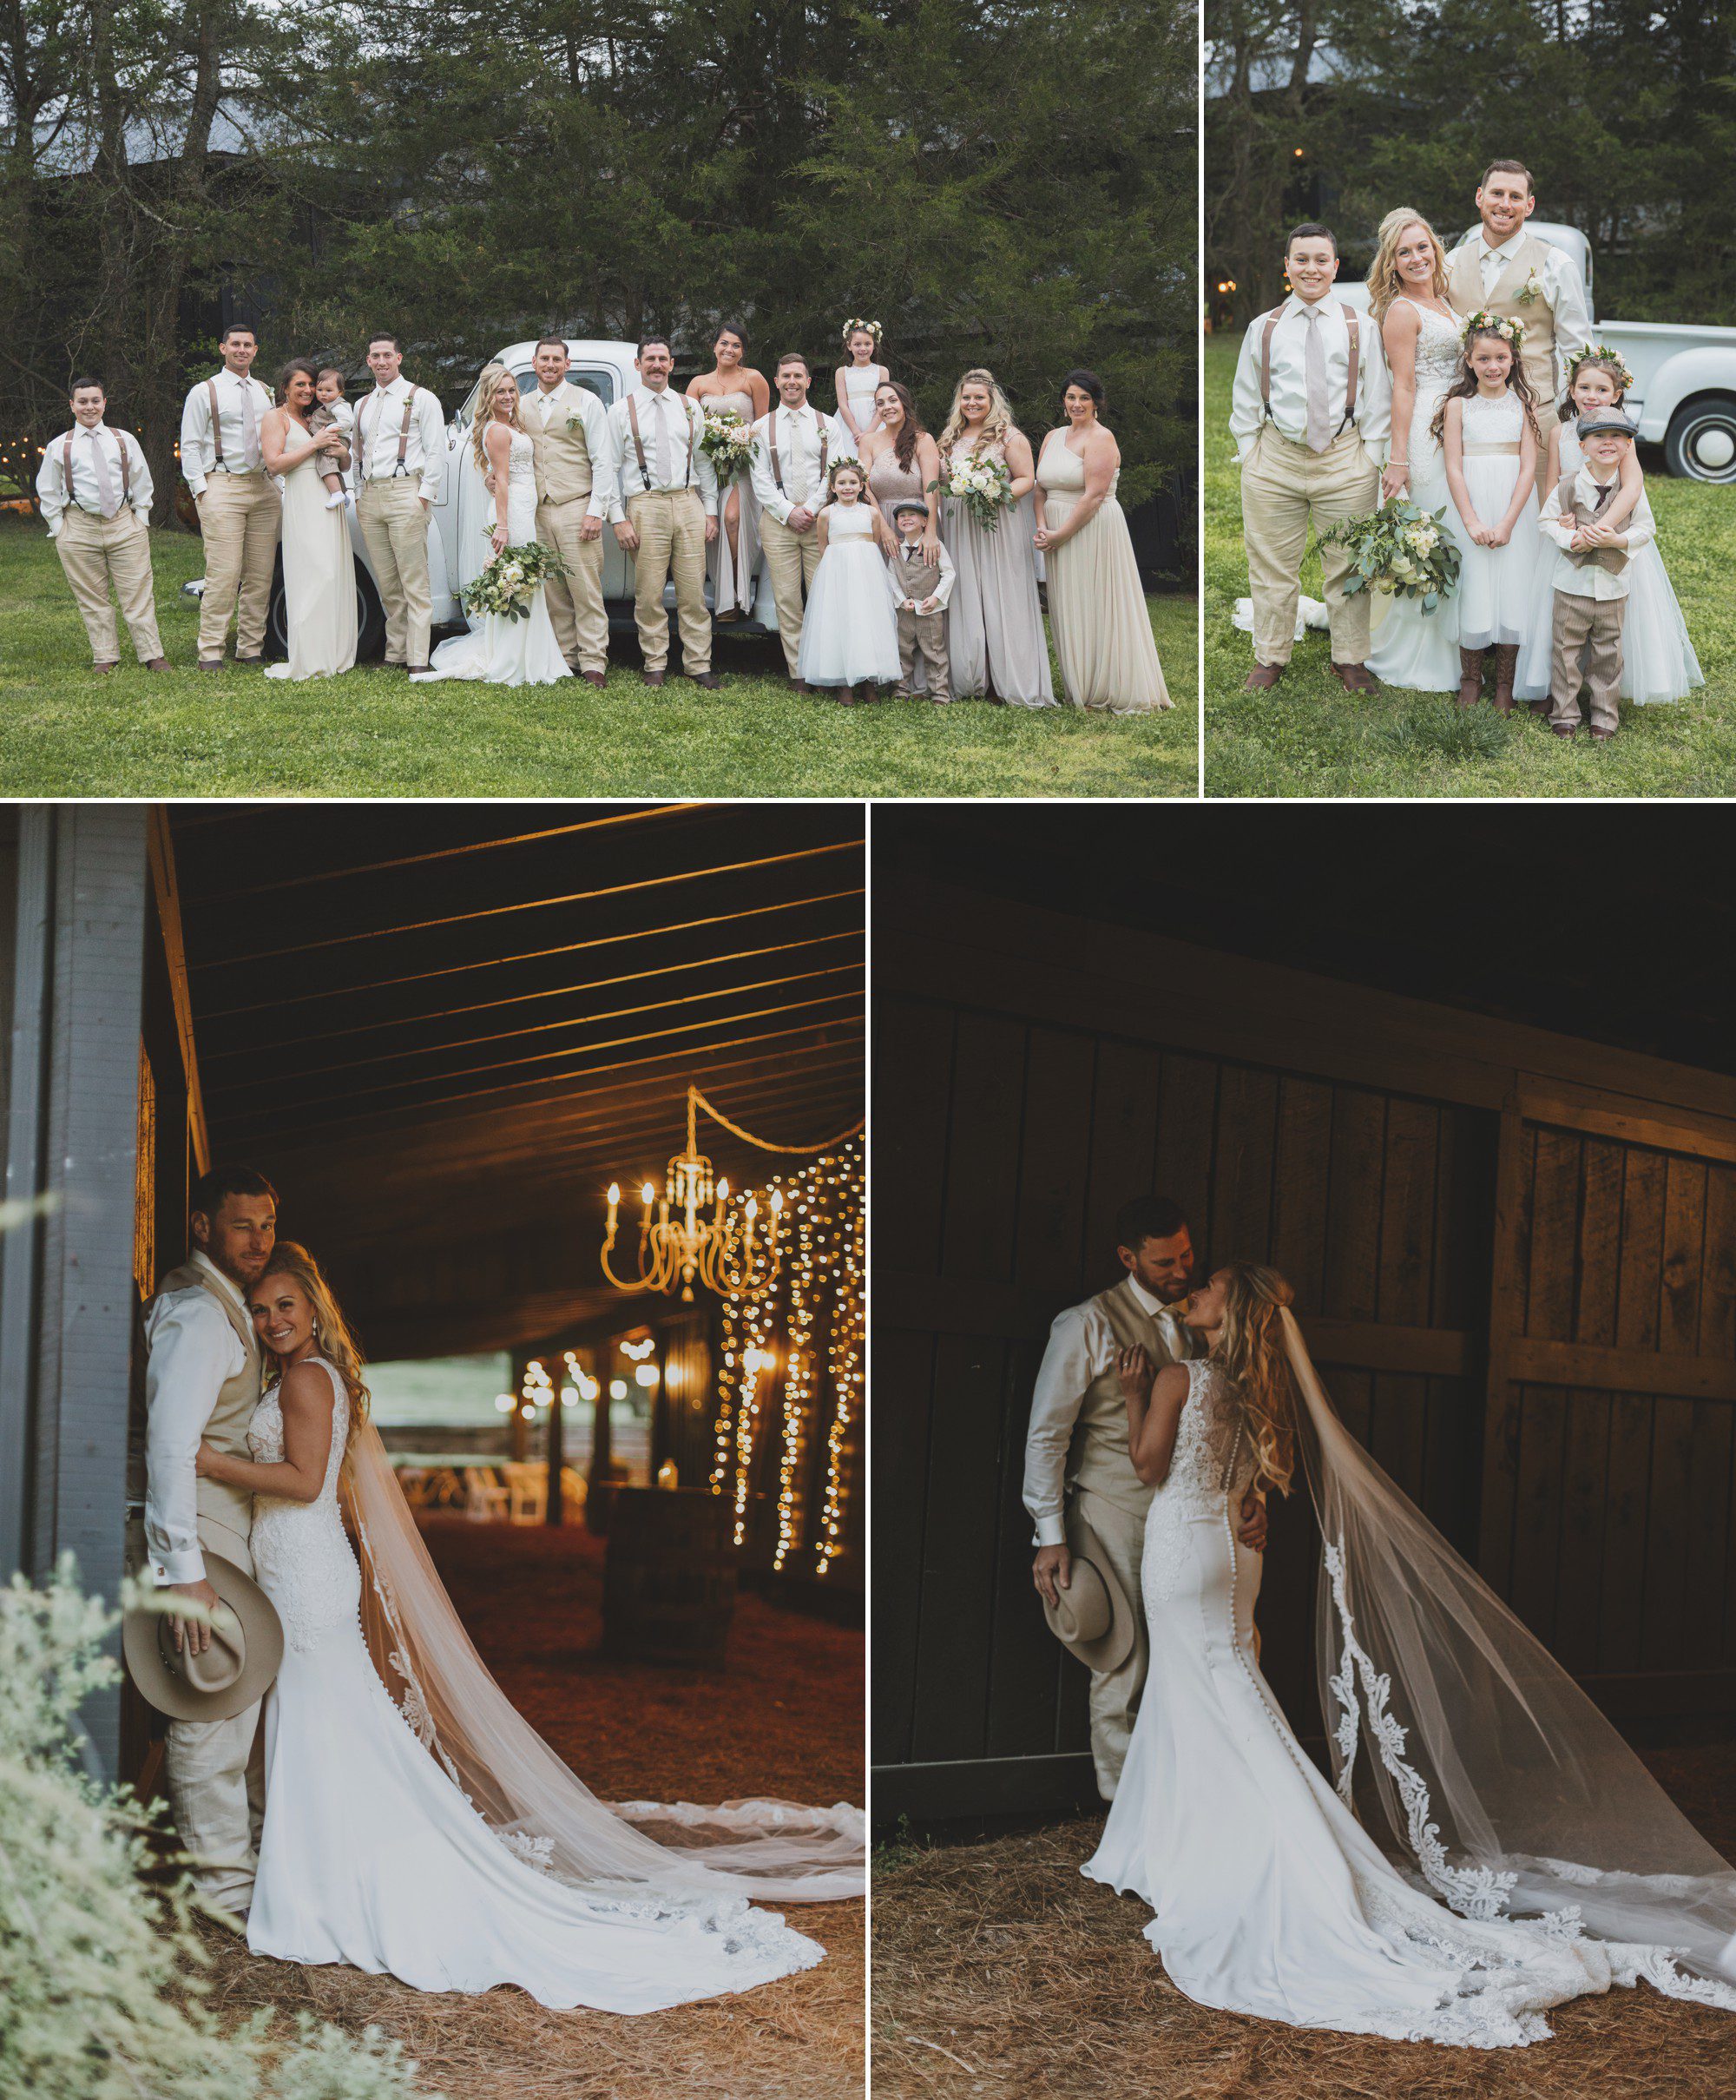 Bridal party by truck and bride and groom in barn with cowboy hat after before the wedding ceremony at Cedarwood weddings in Nashville, TN. April spring wedding, photos by Krista Lee Photography.